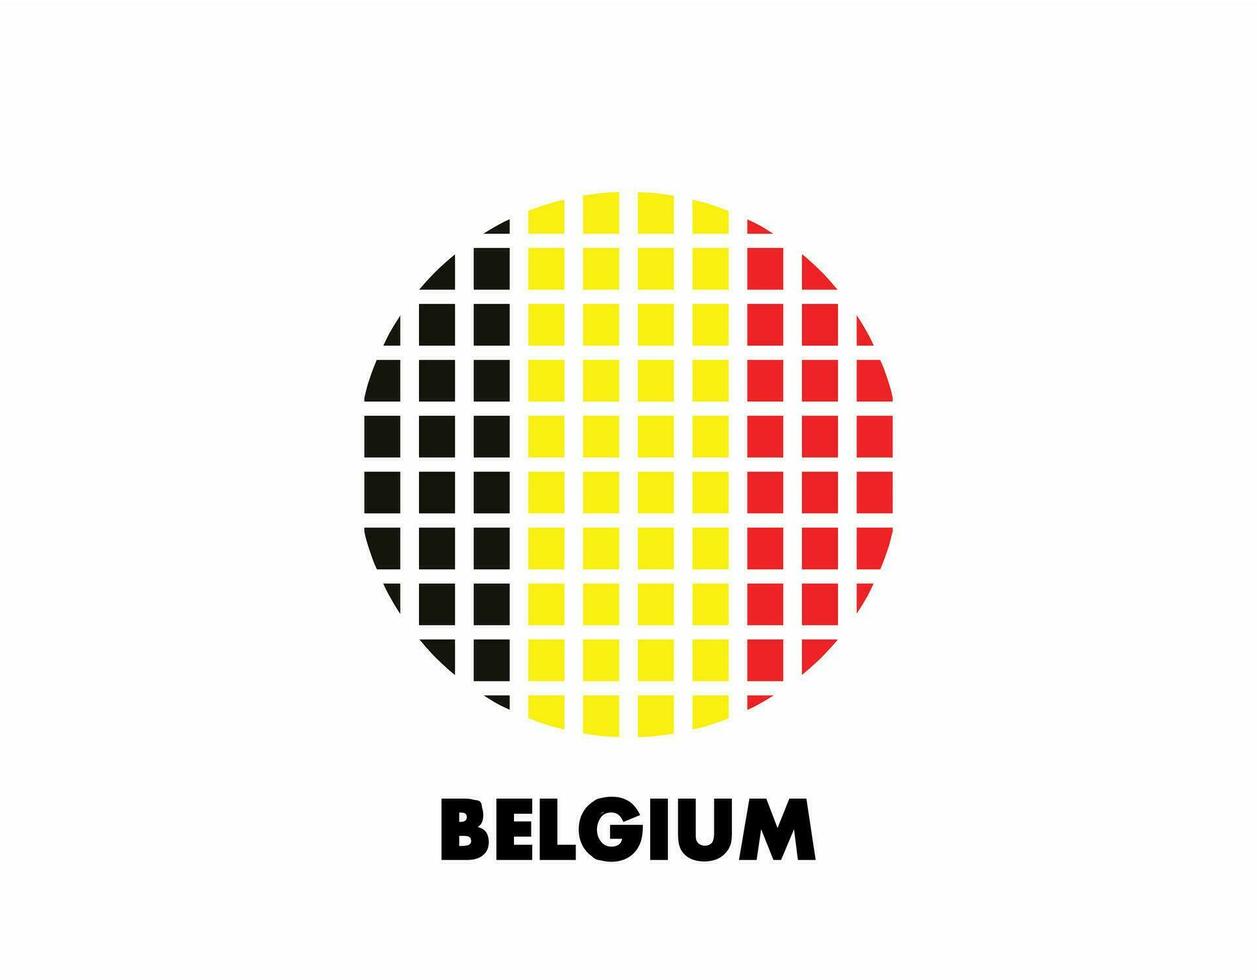 The Belgium round flag icon. Design flag with the arrangement of squares that form a circle. Flag with black, yellow, red. vector